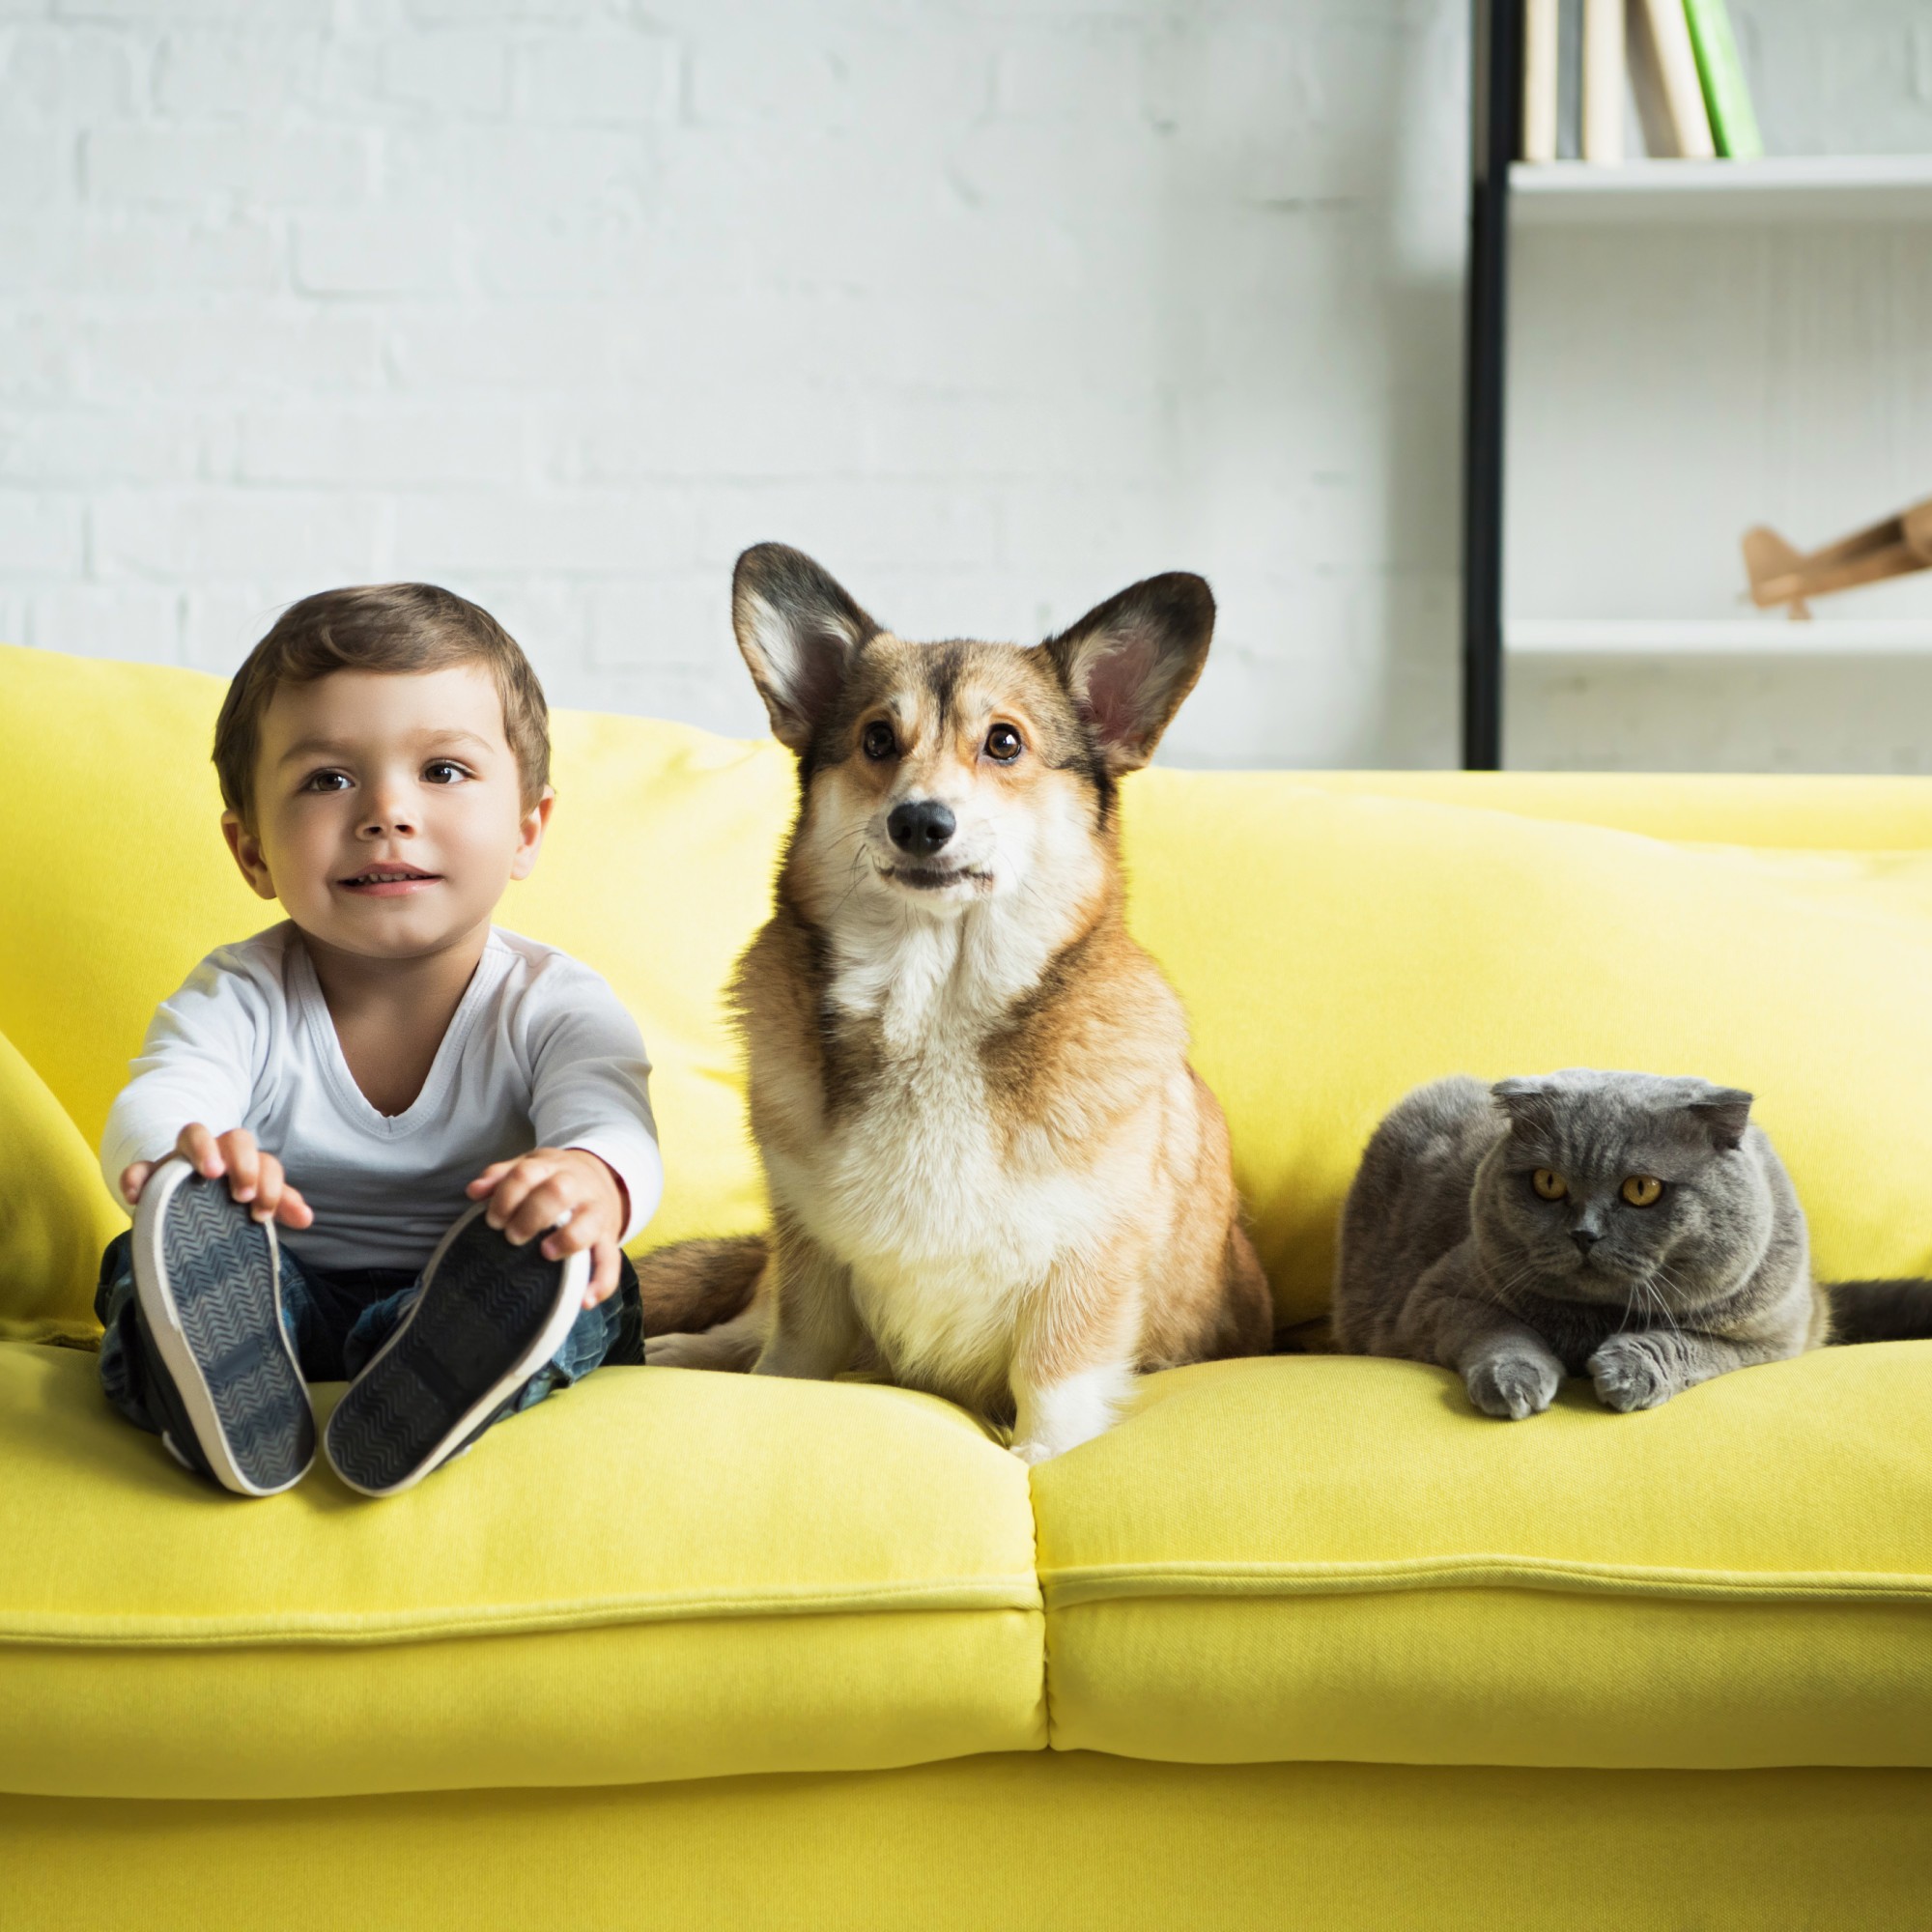 kid, dog, and cat on couch